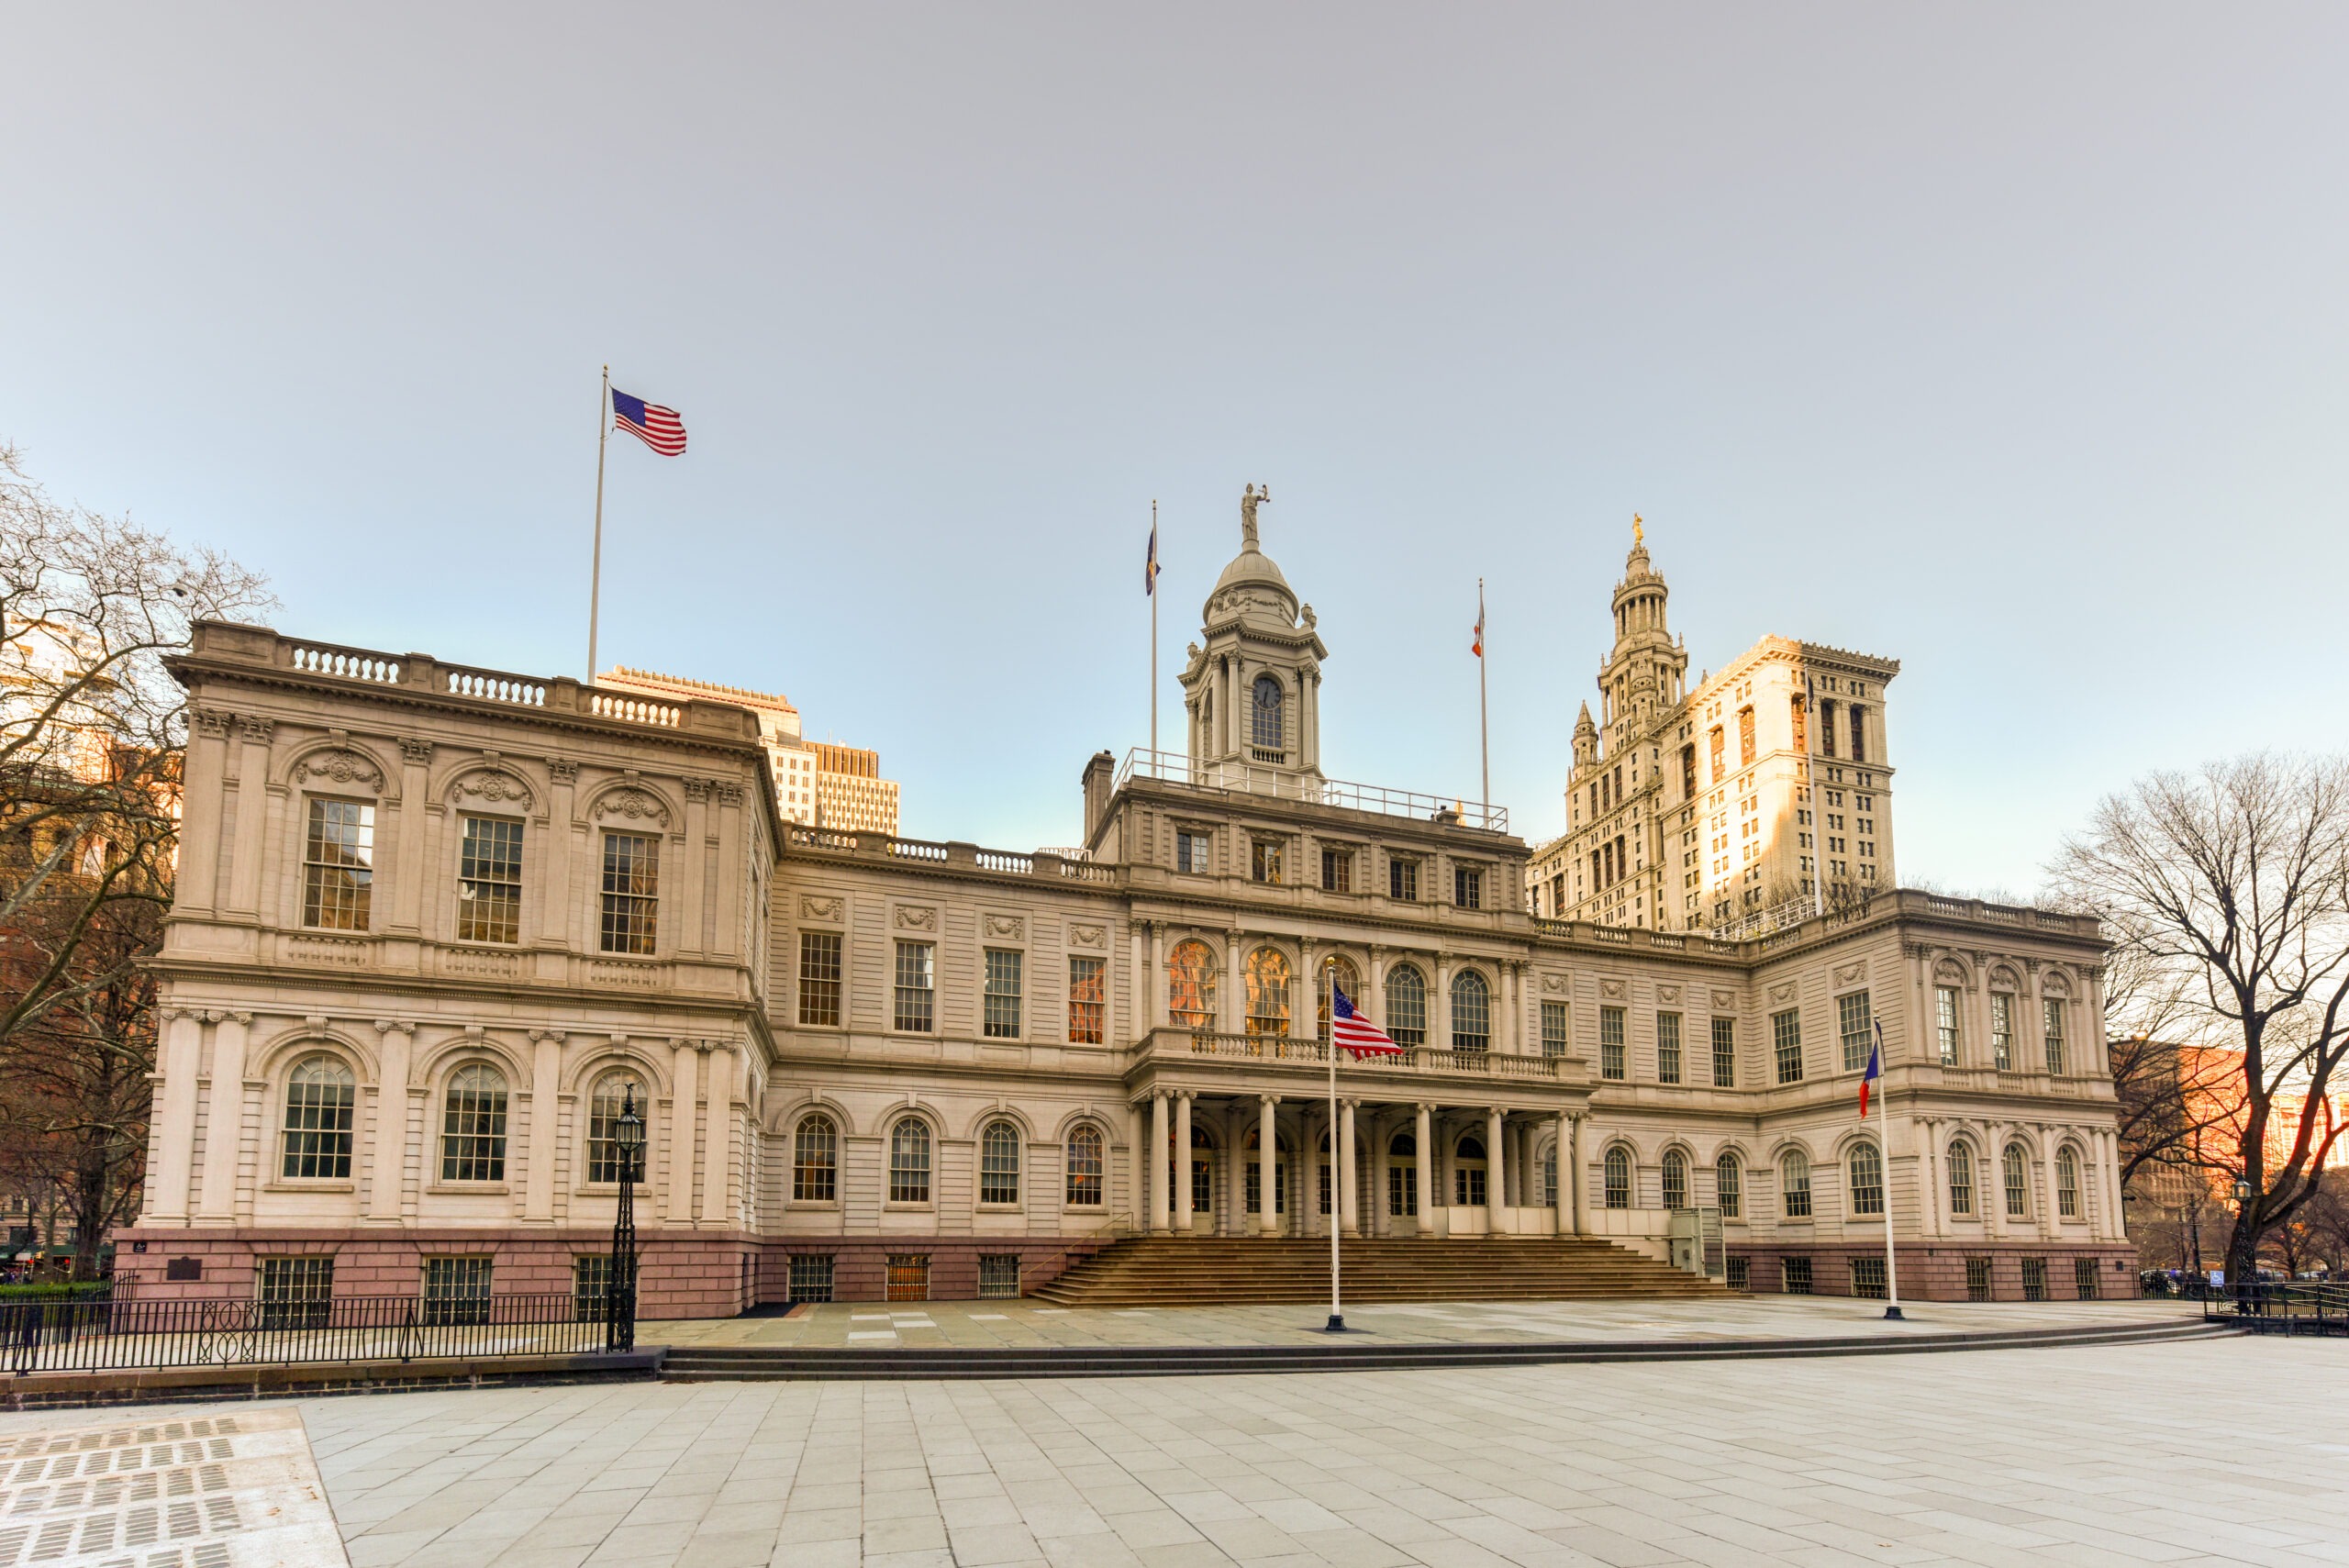 New York City Hall, the seat of New York City government, located at the center of City Hall Park in the Civic Center area of Lower Manhattan, between Broadway, Park Row, and Chambers Street.